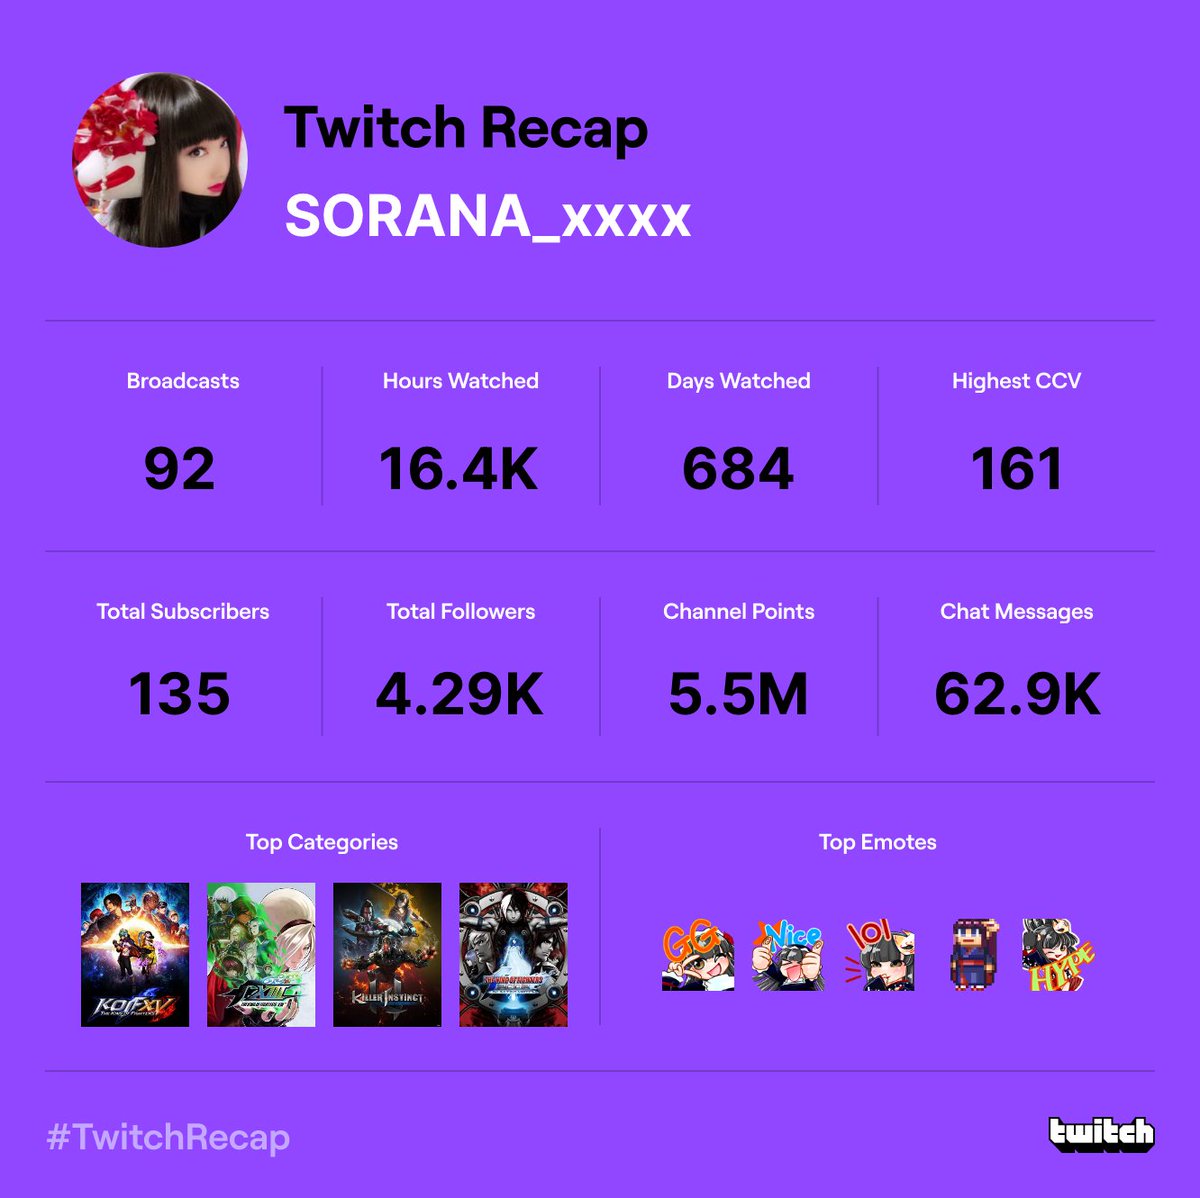 This year I turned 43 and my overtime at work averaged 40+ hours per month, but thanks to y'all, I was able to continue to stream‼️
I am happy to have met so many great people through Stream and fighting games🥰

I'll keep my stream going next year✌️
#TwitchRecap #TwitchRecap2022